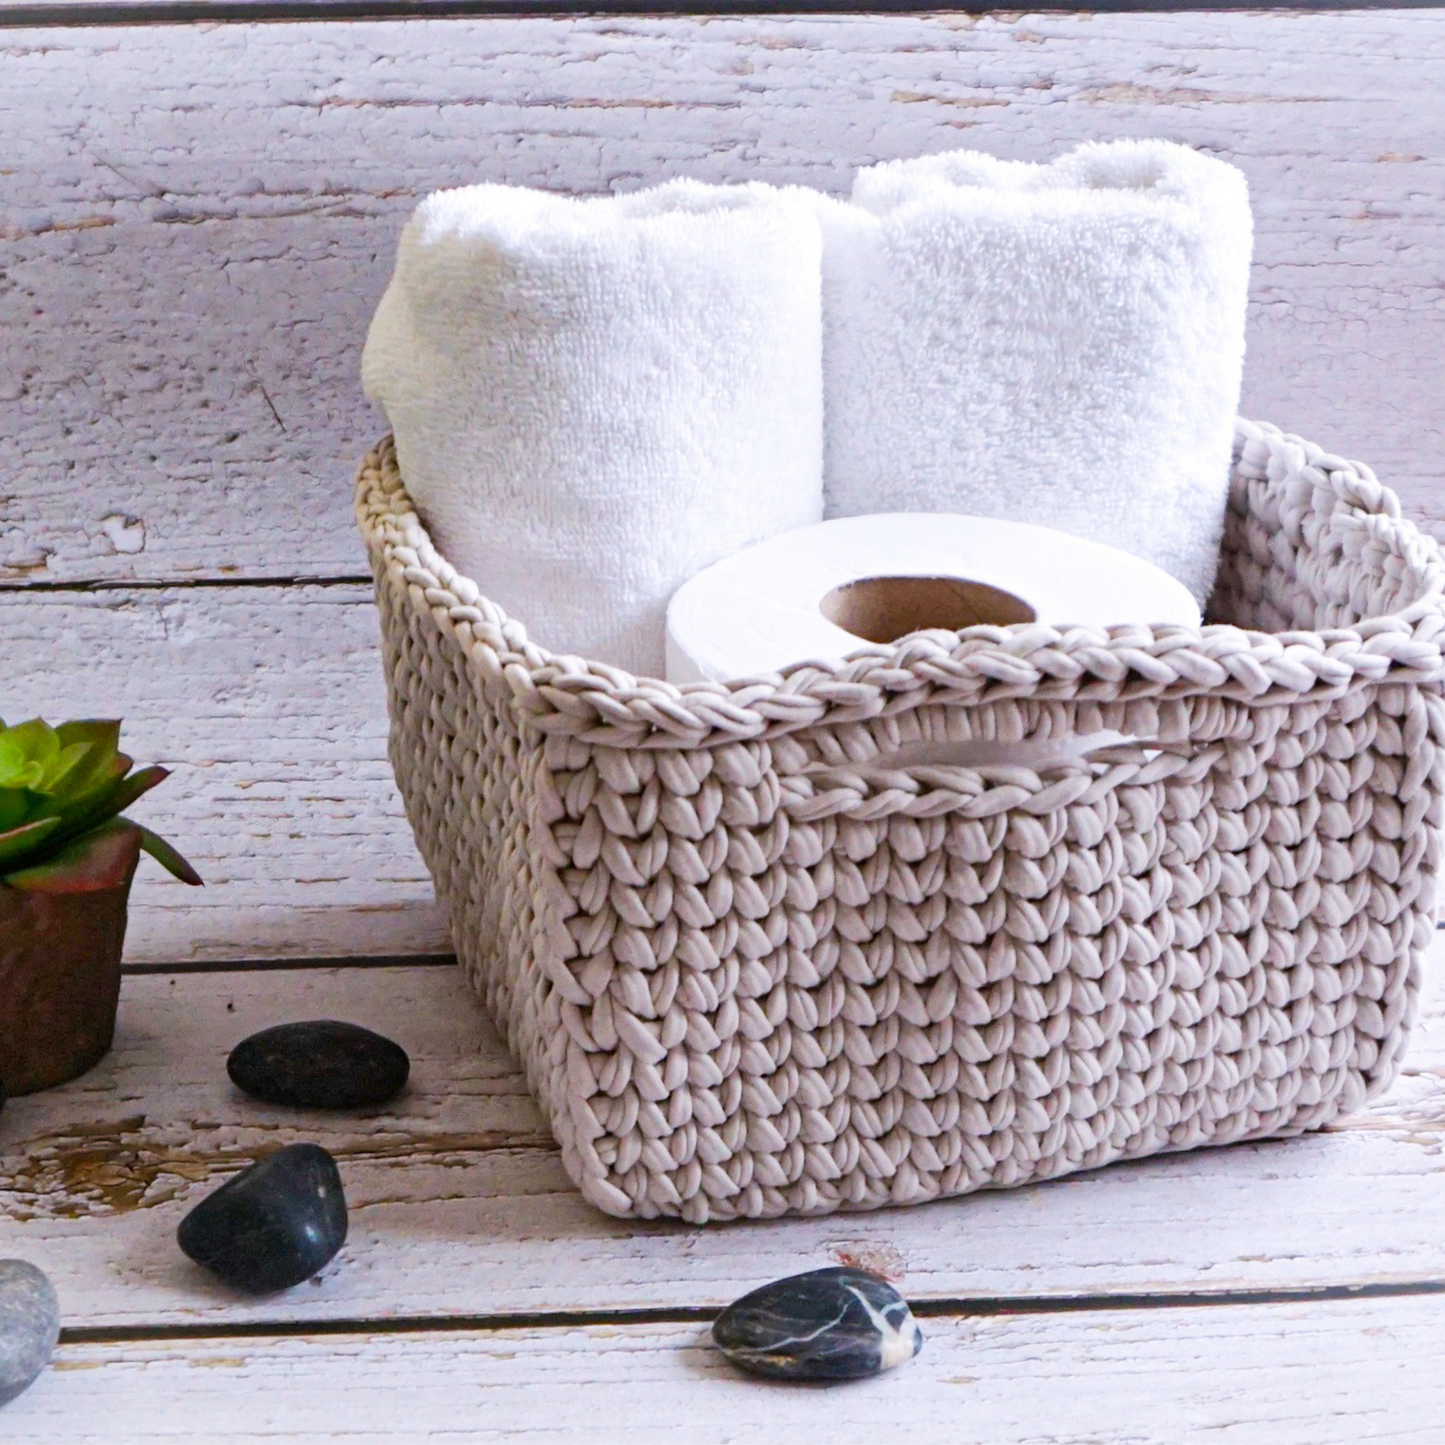 DIY Crochet Square Basket Kit with wooden base and handles